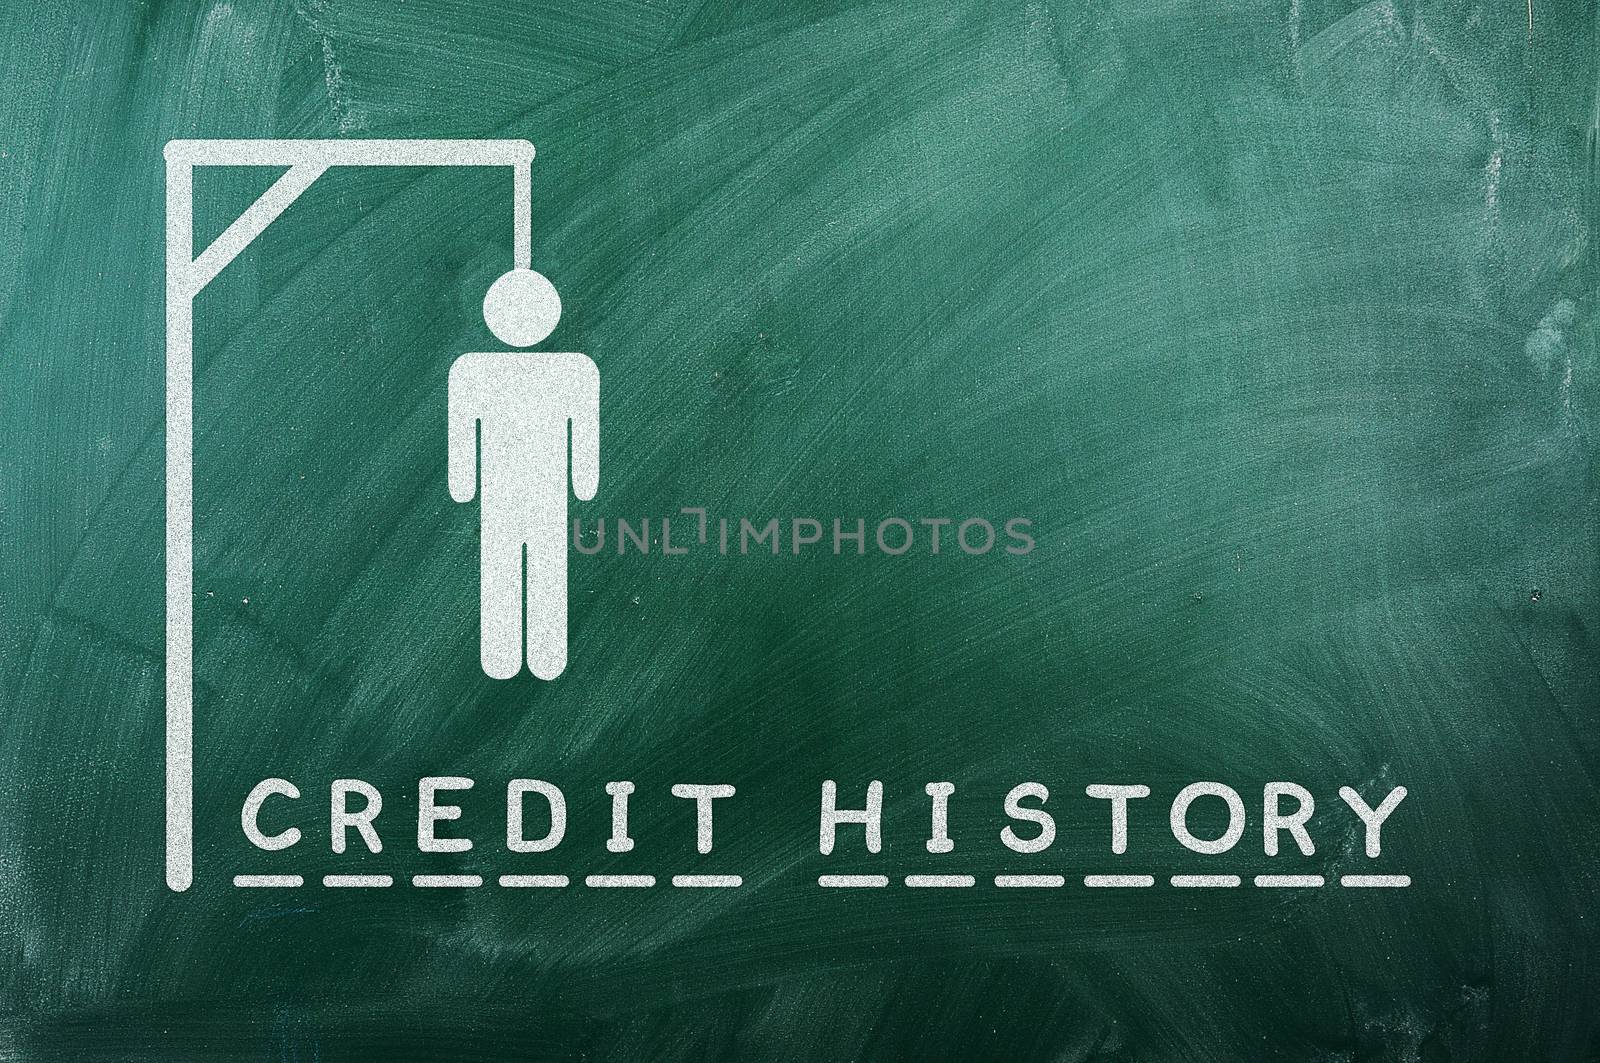 gallows game-businessman bancruptcy on green blackboard and text "credit history"